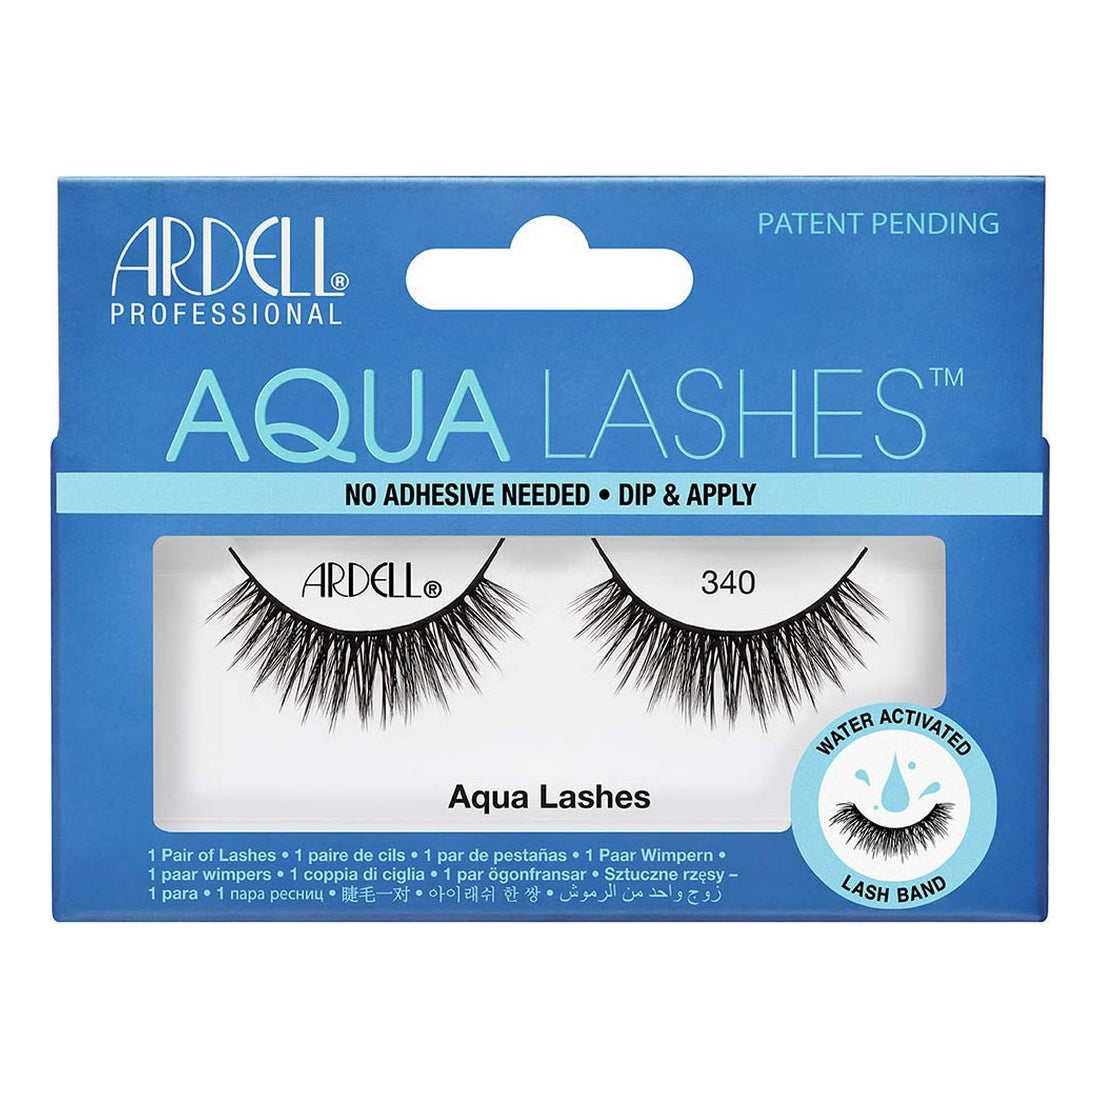 Valse Wimpers Aqua Lashes Ardell 63401 Nº 340